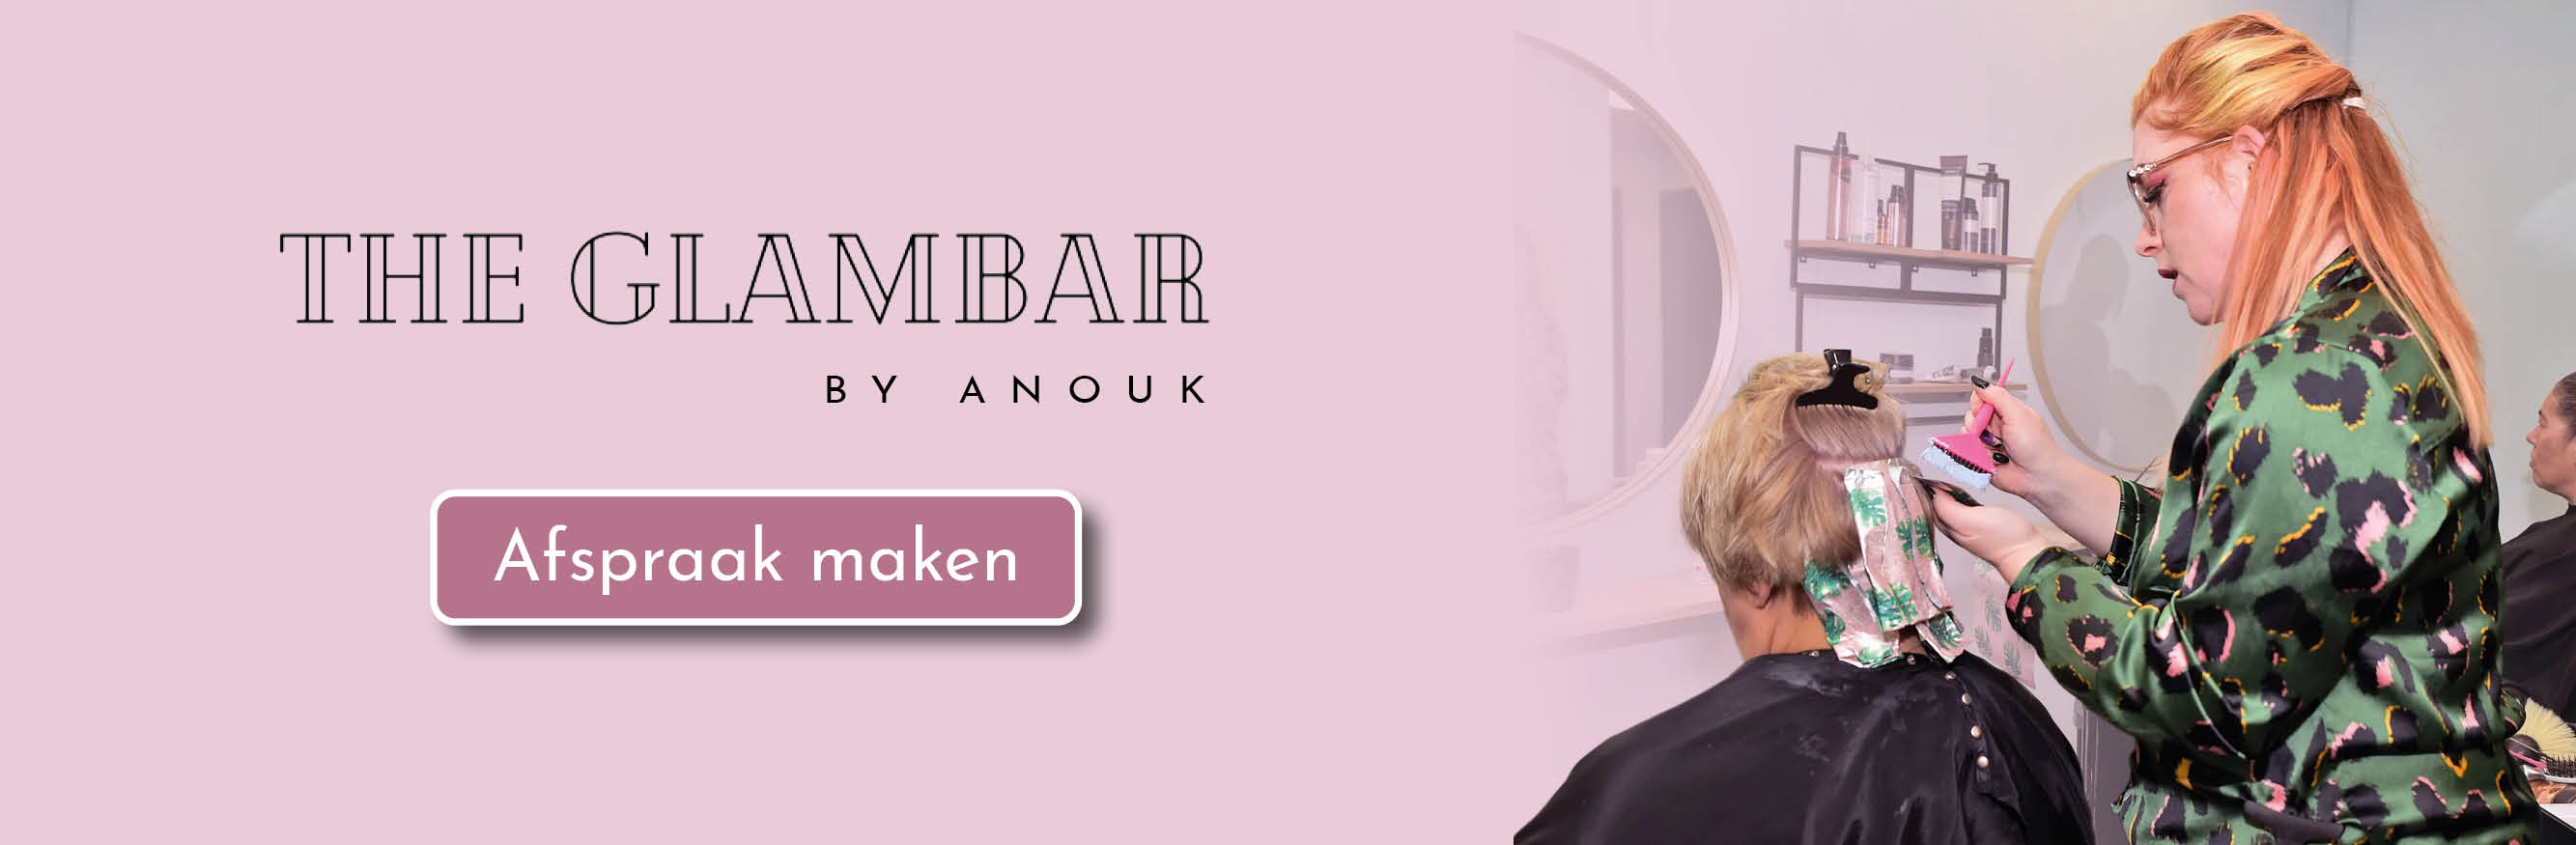 06439 The Glammbar By Anouk 